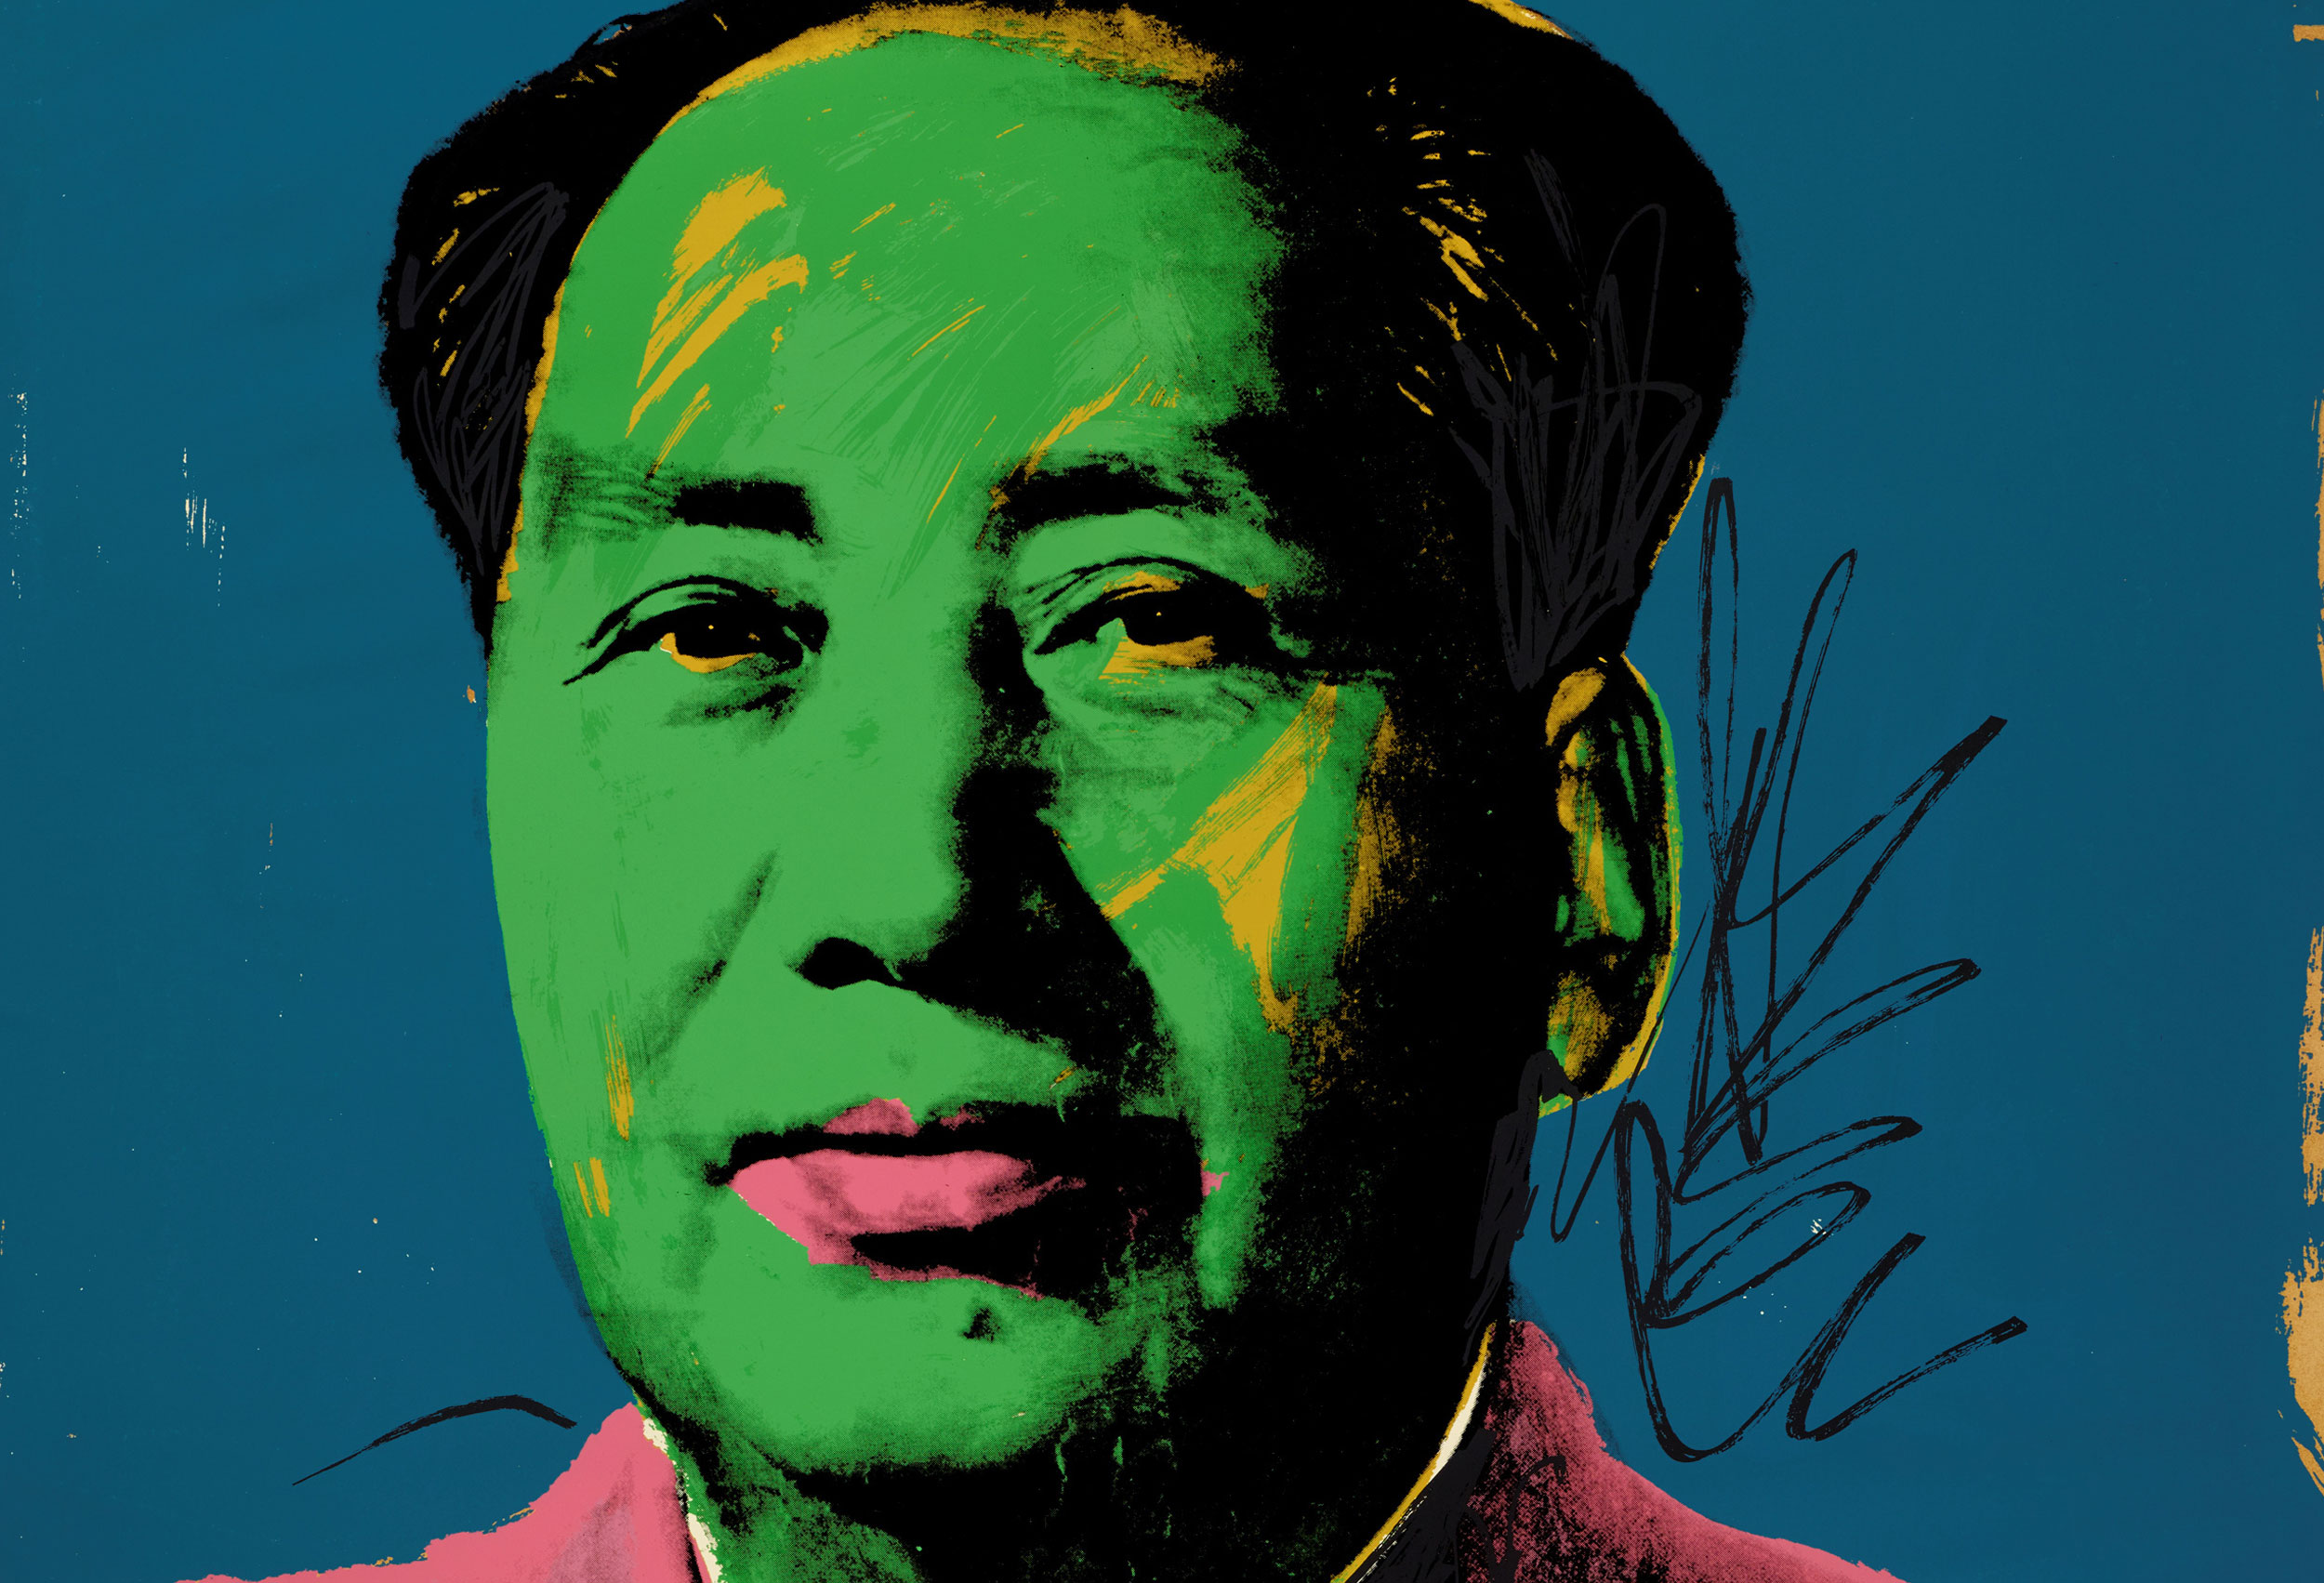 Andy Warhol Mao 1972 (detail), Art Gallery of New South Wales © Andy Warhol Foundation/ ARS, New York. Copyright Agency